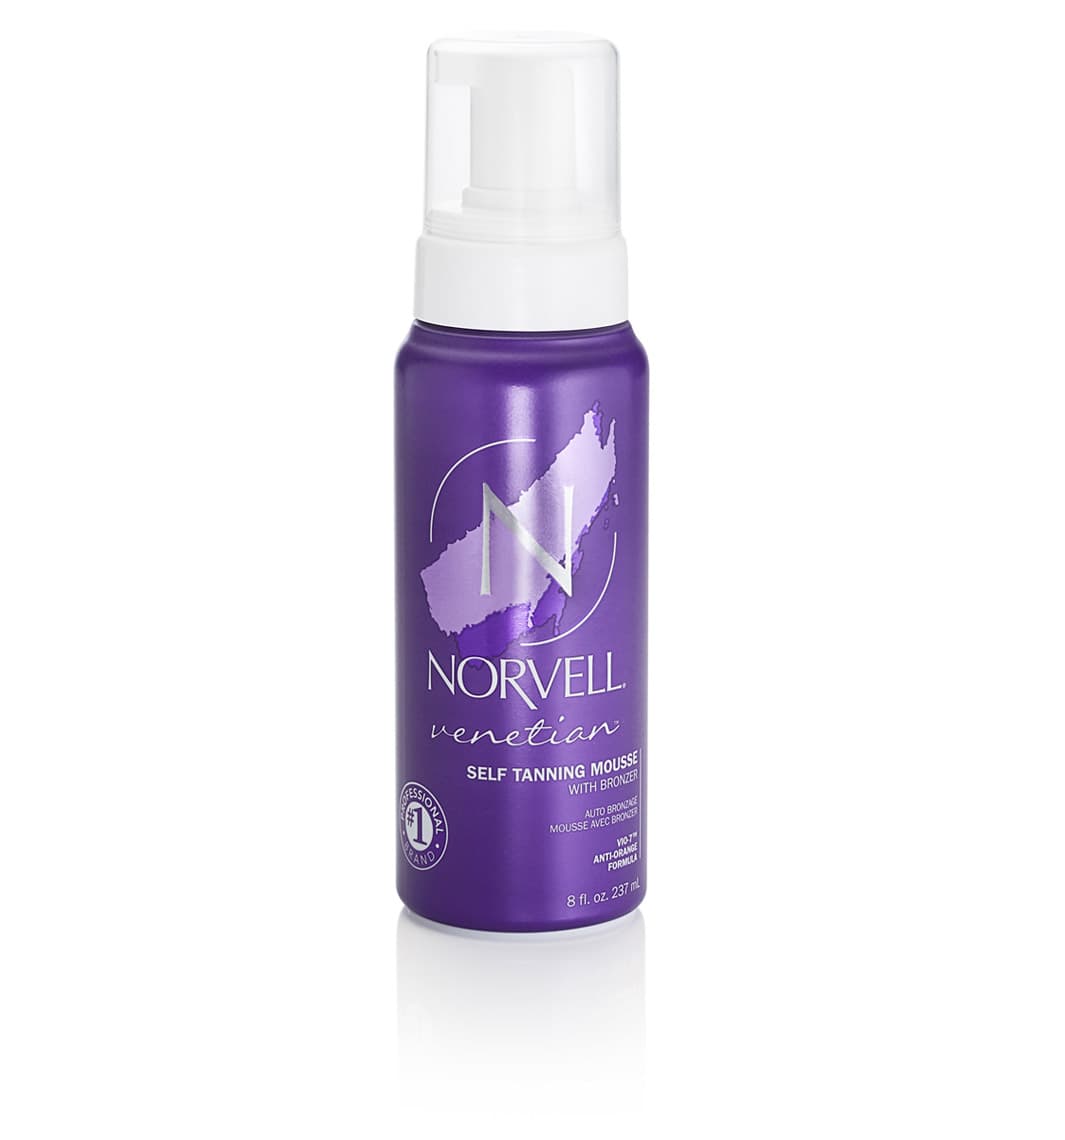 Norvell Venetian Sunless Self-Tanning Mousse with Bronzer - Instant Self Tanner - Natural Looking - Anti-Orange - Fake Tan for Bronzing Glow, 8 fl.oz. 8 Fl Oz (Pack of 1)